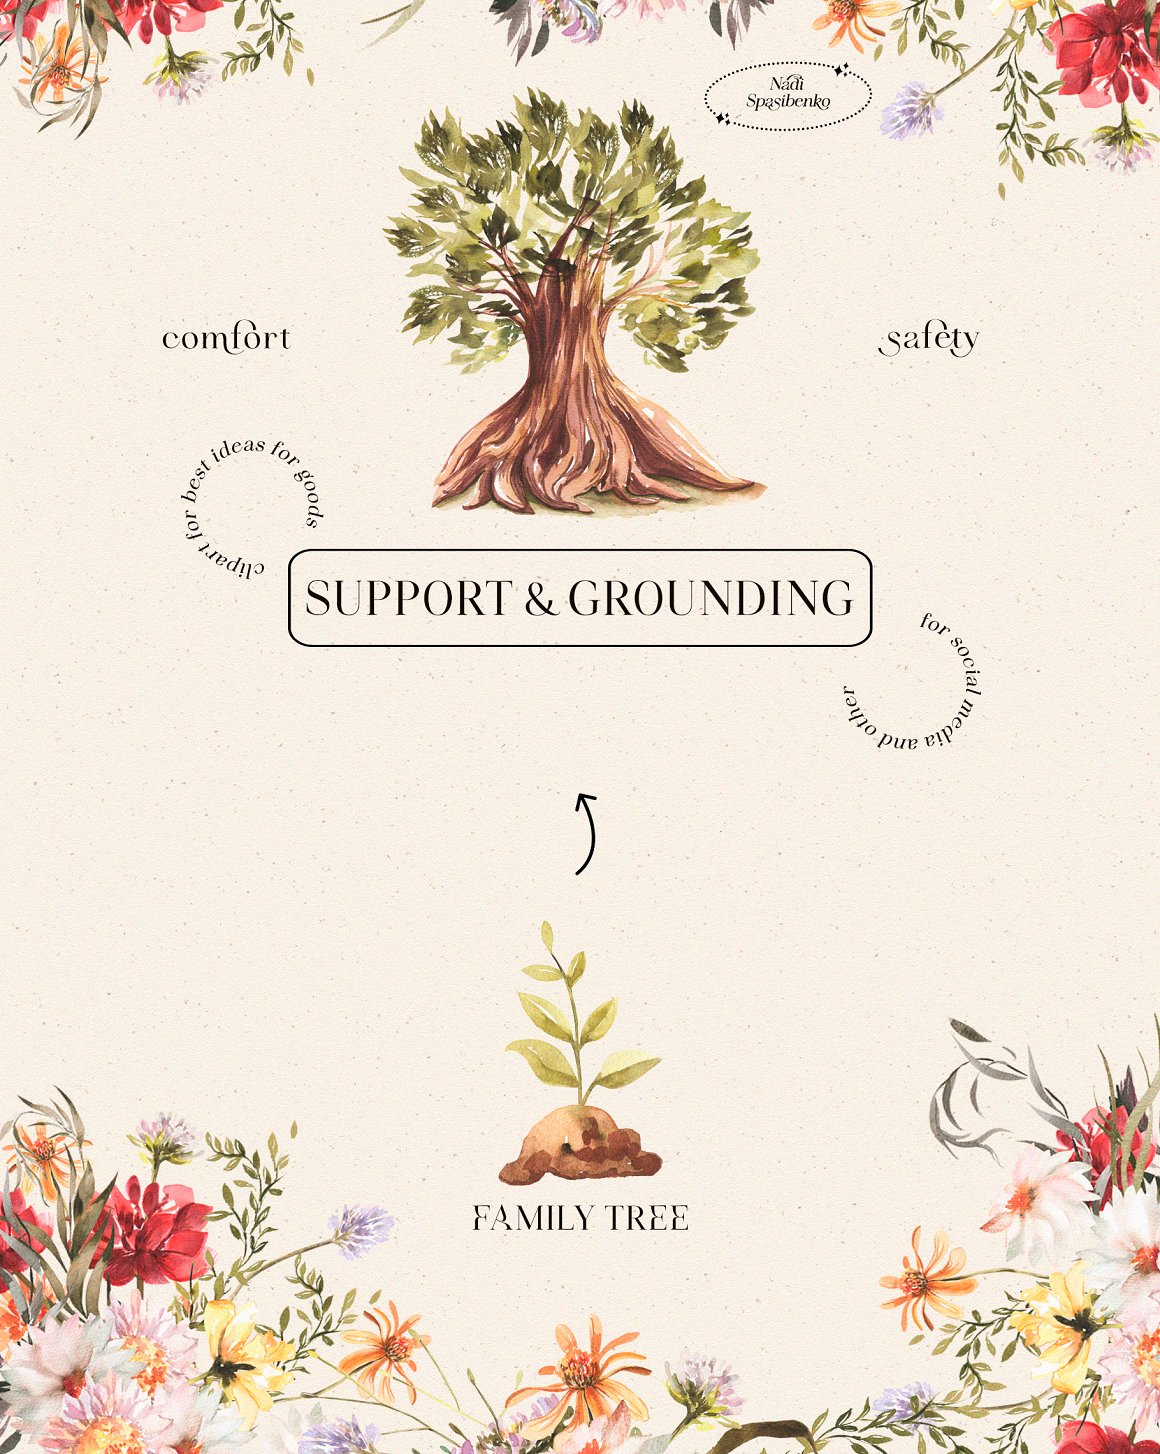 Black lettering "Support & Grounding" and family tree.